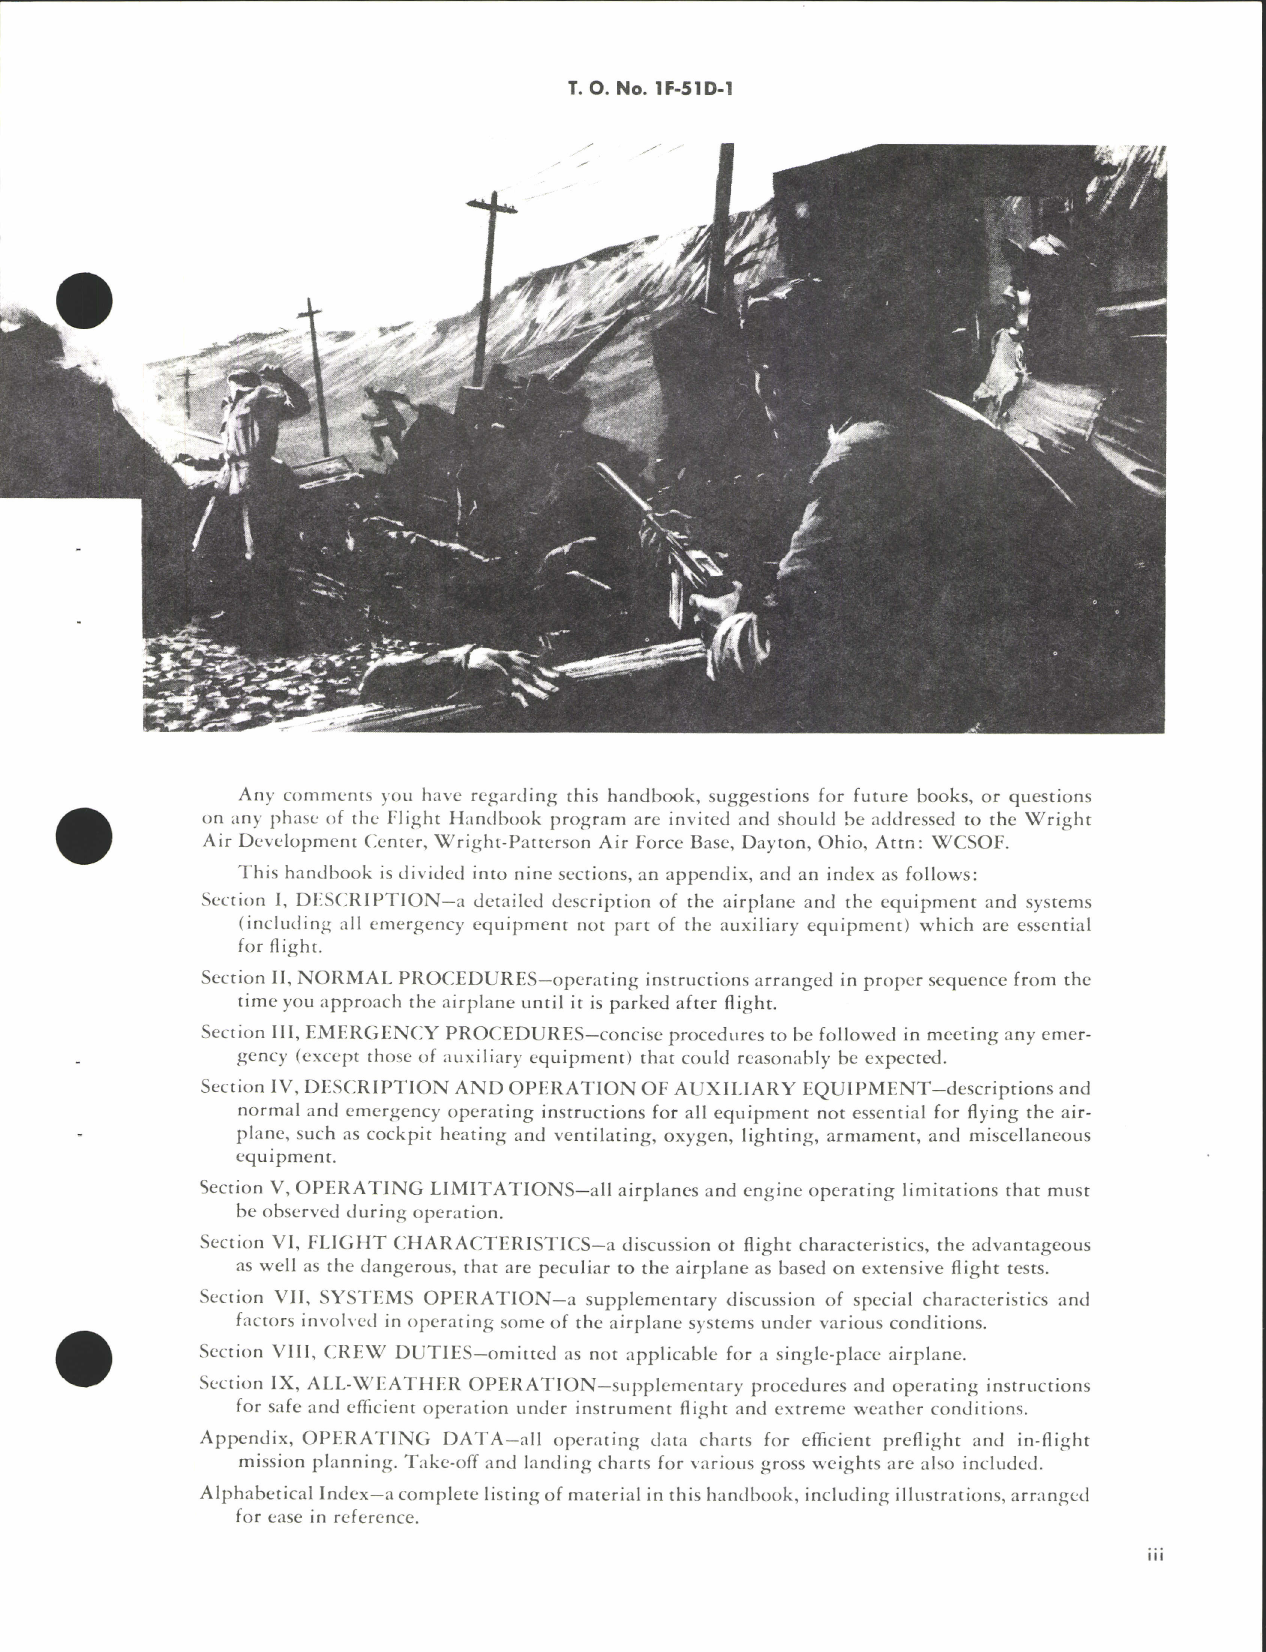 Sample page 5 from AirCorps Library document: Flight Handbook for F-51D